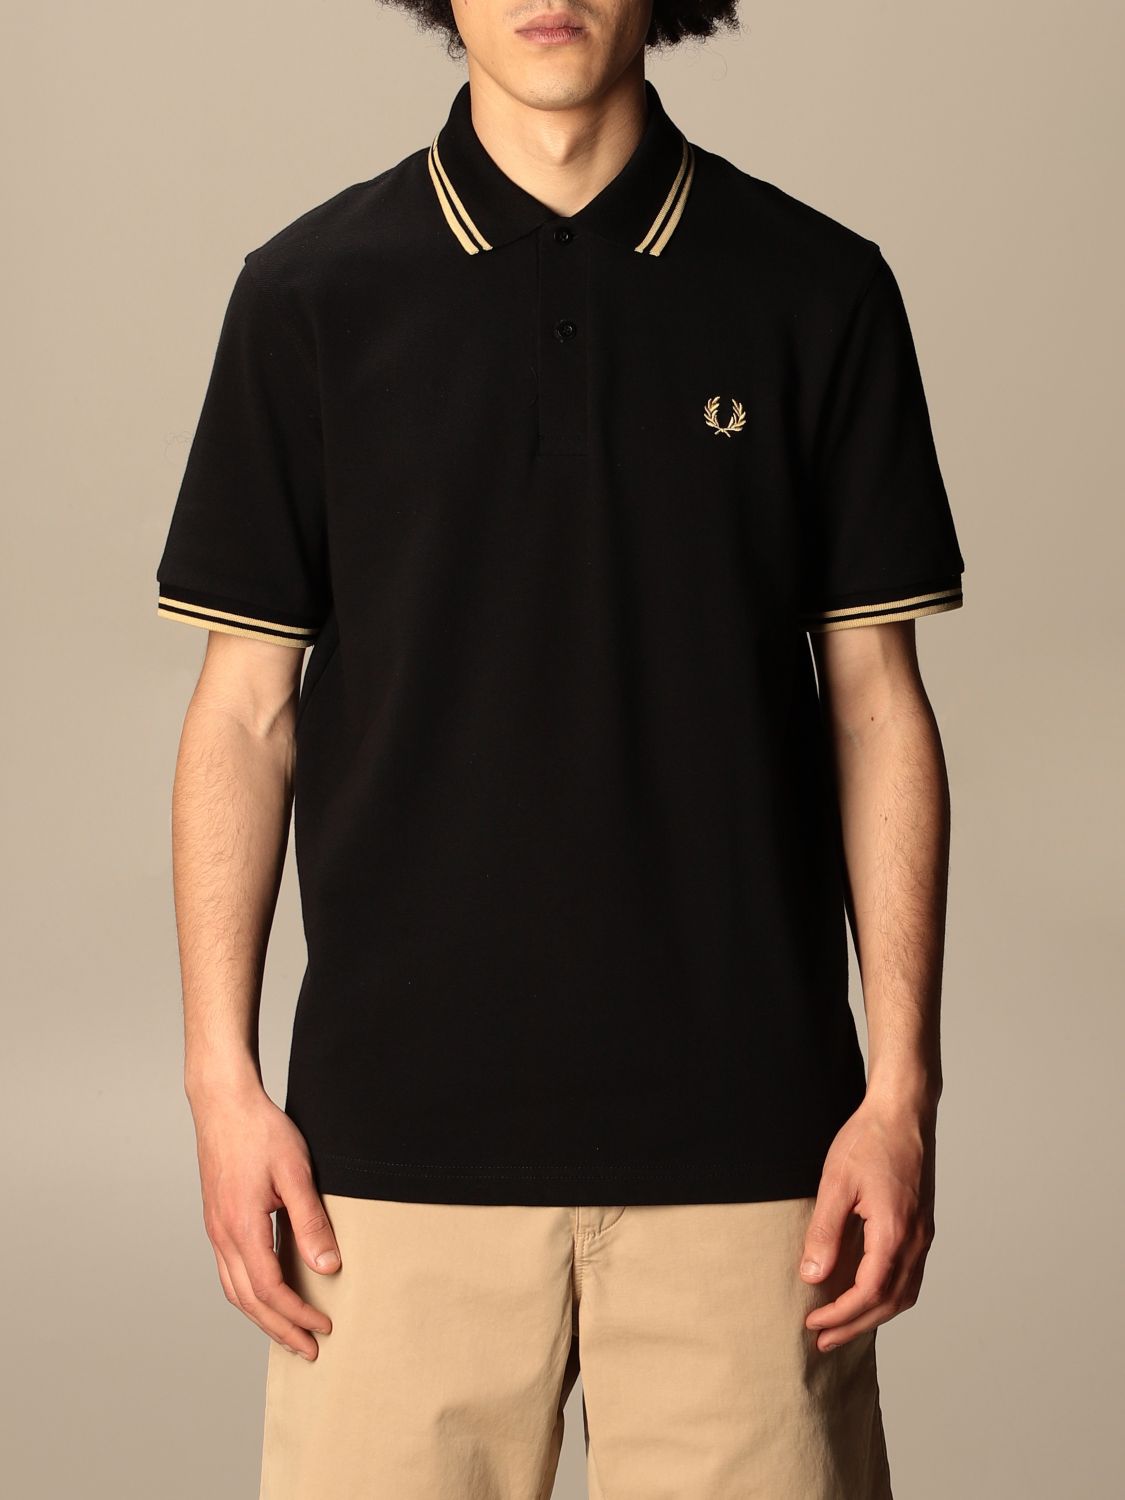 sokken groentje kandidaat FRED PERRY: polo shirt for man - Black | Fred Perry polo shirt M1237 online  on GIGLIO.COM